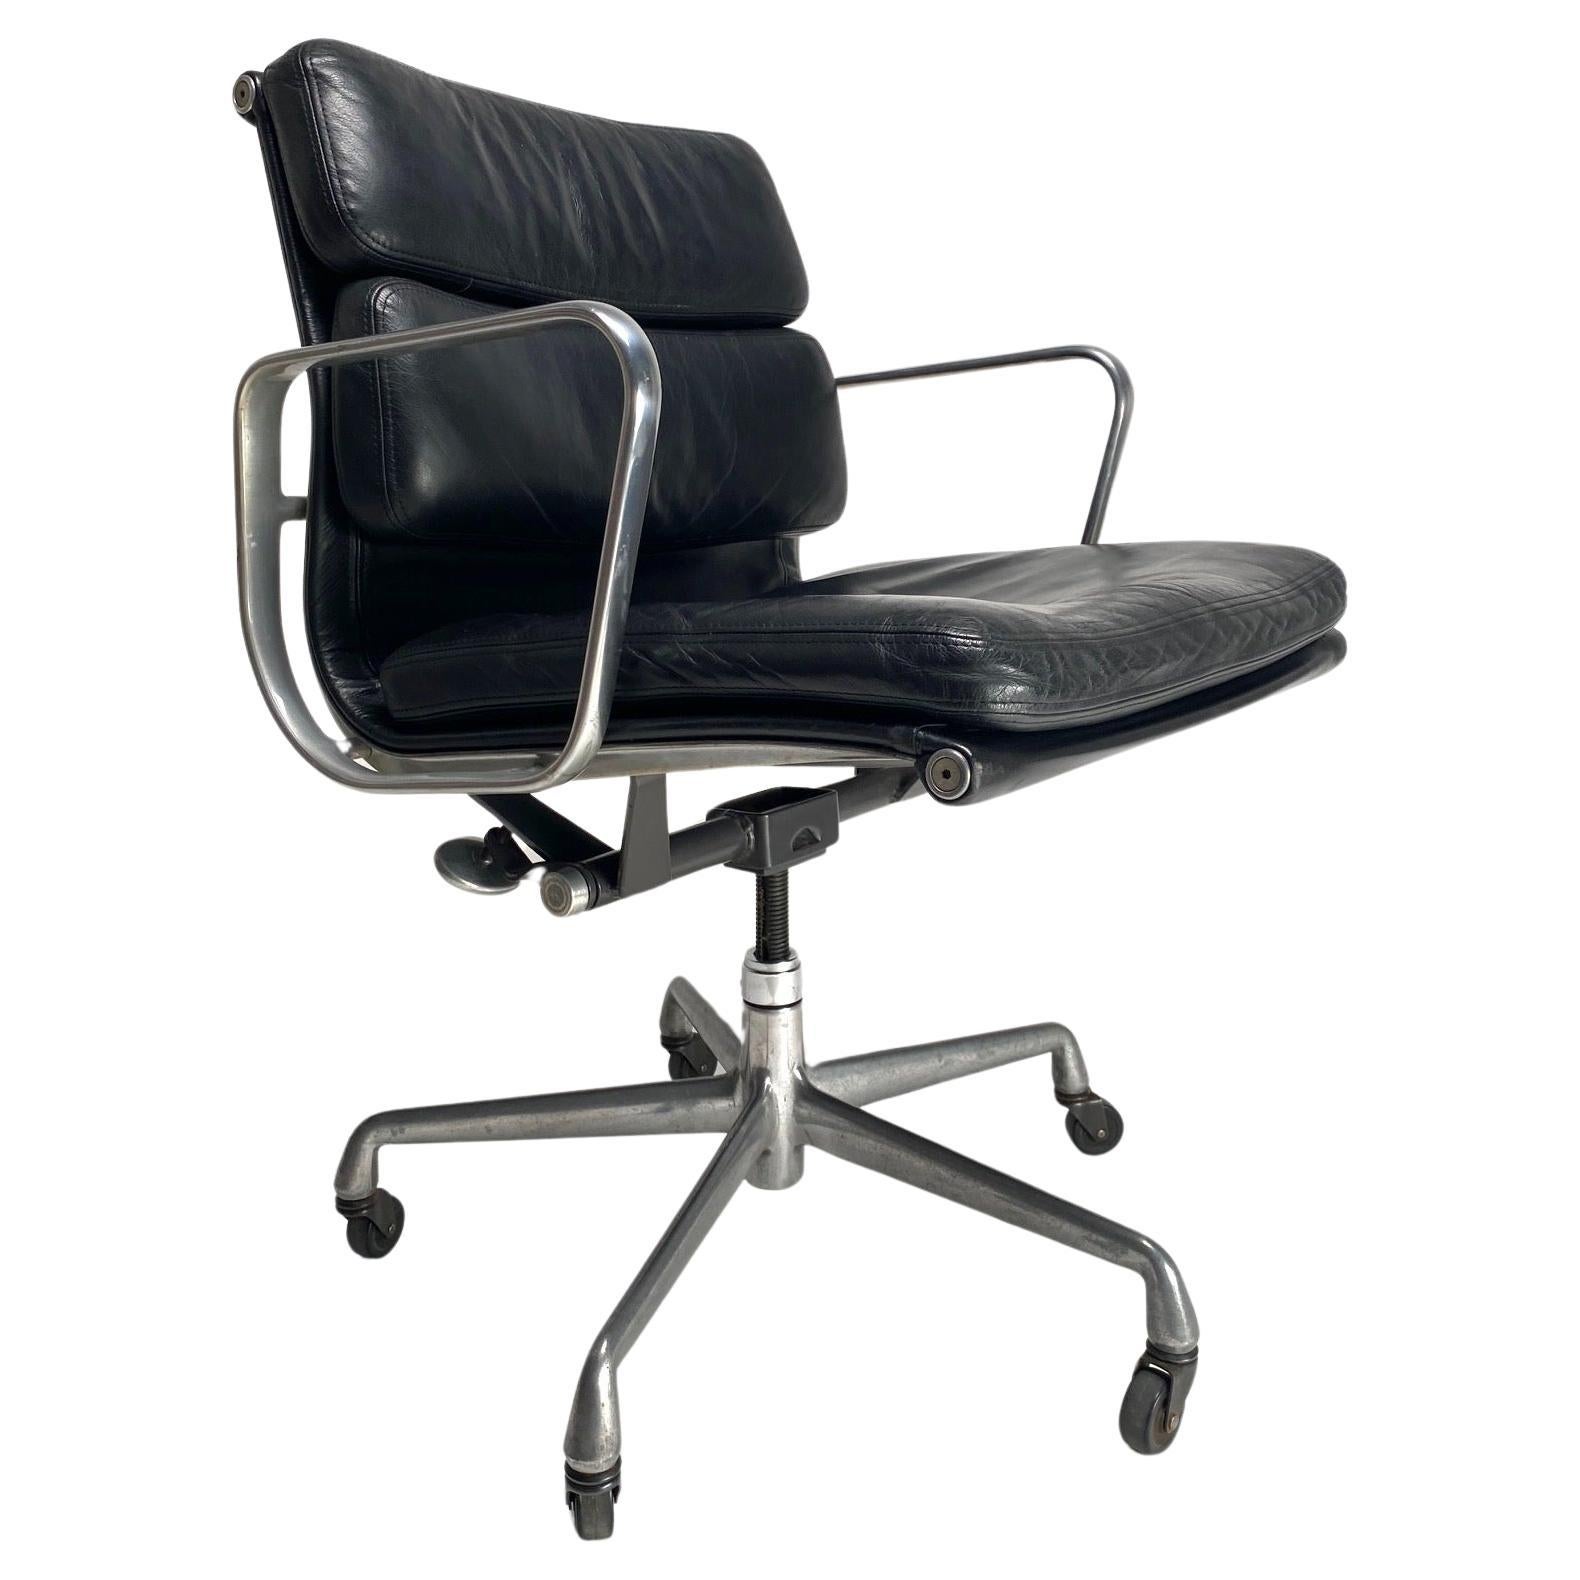 EA217 black Soft Pad Chair by Charles & Ray Eames for Herman miller, 1970s For Sale